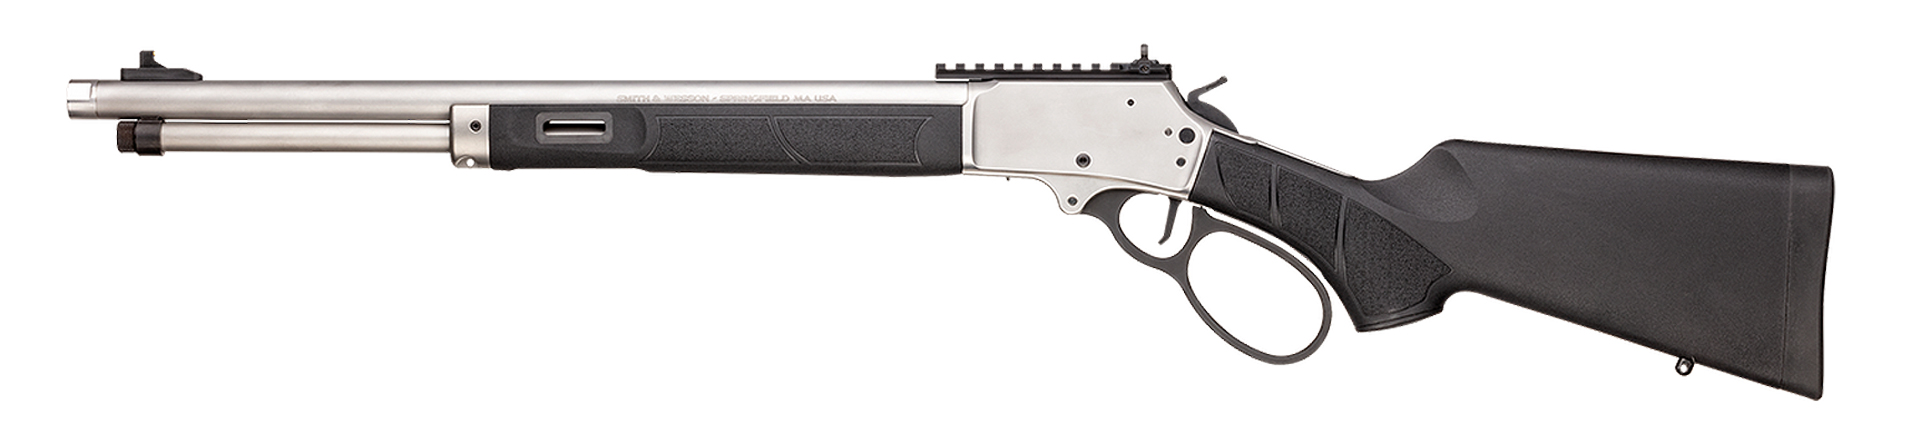 left-side view smith & wesson 1854 series stainless steel tactical lever-action rifle on white background